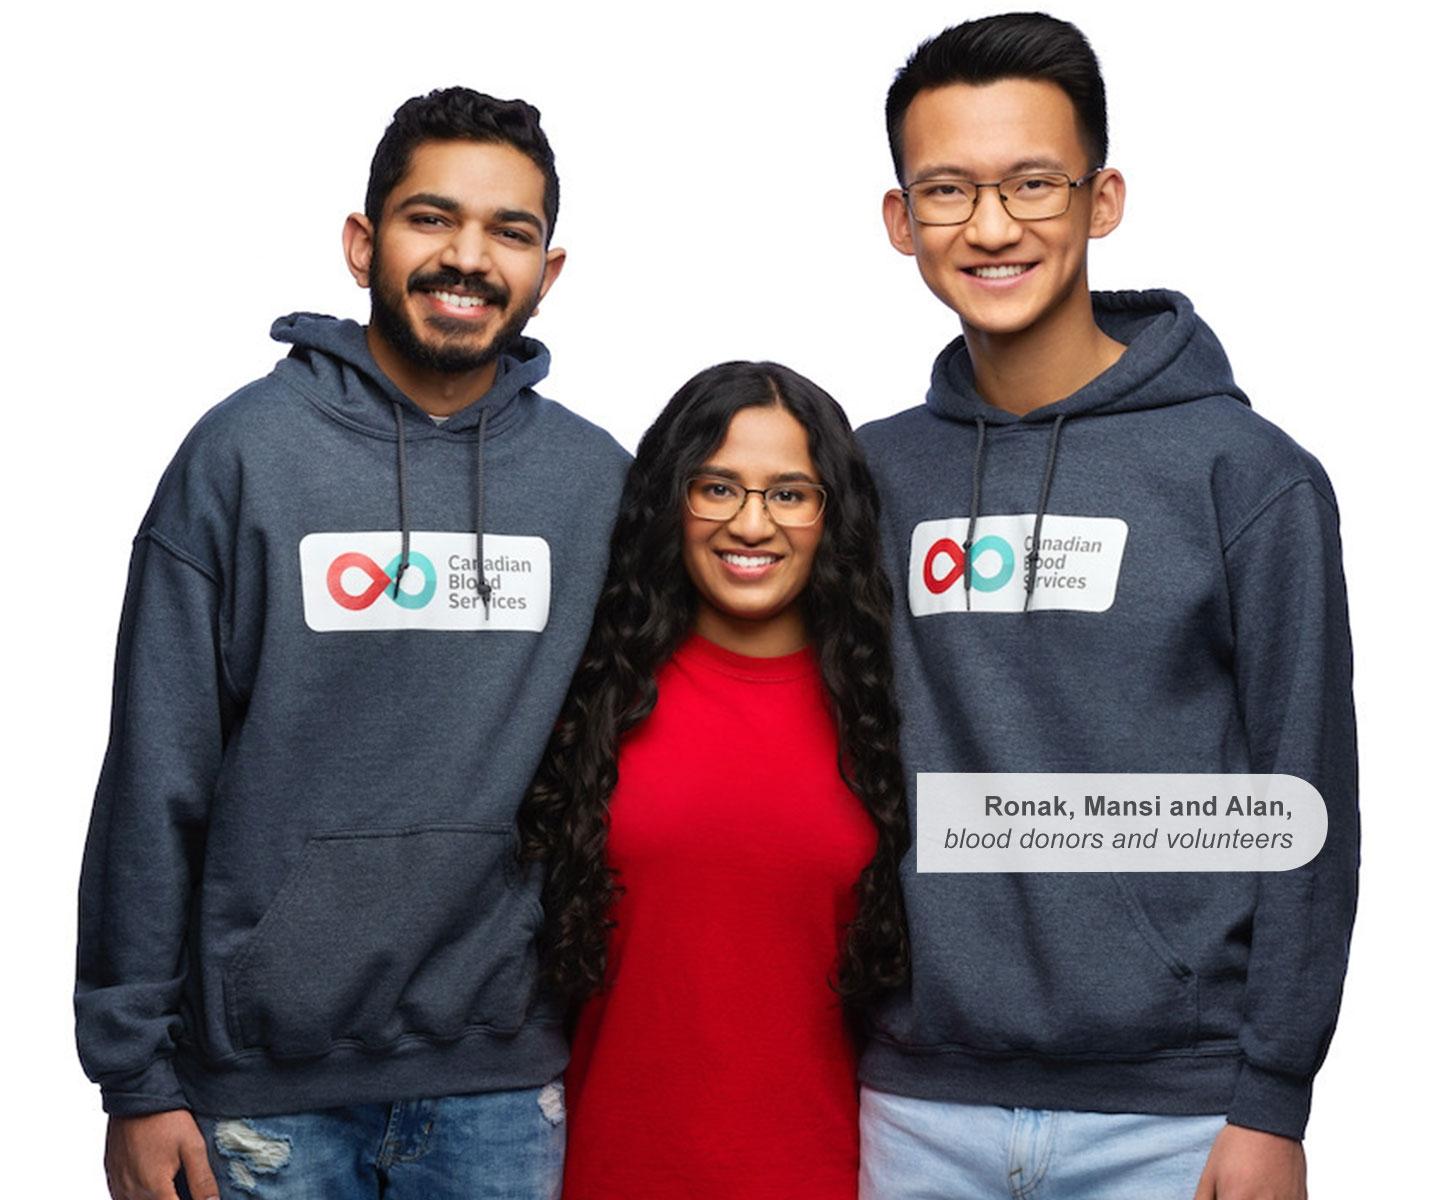 Three blood donors wearing Canadian Blood Services hoodies and a red shirt